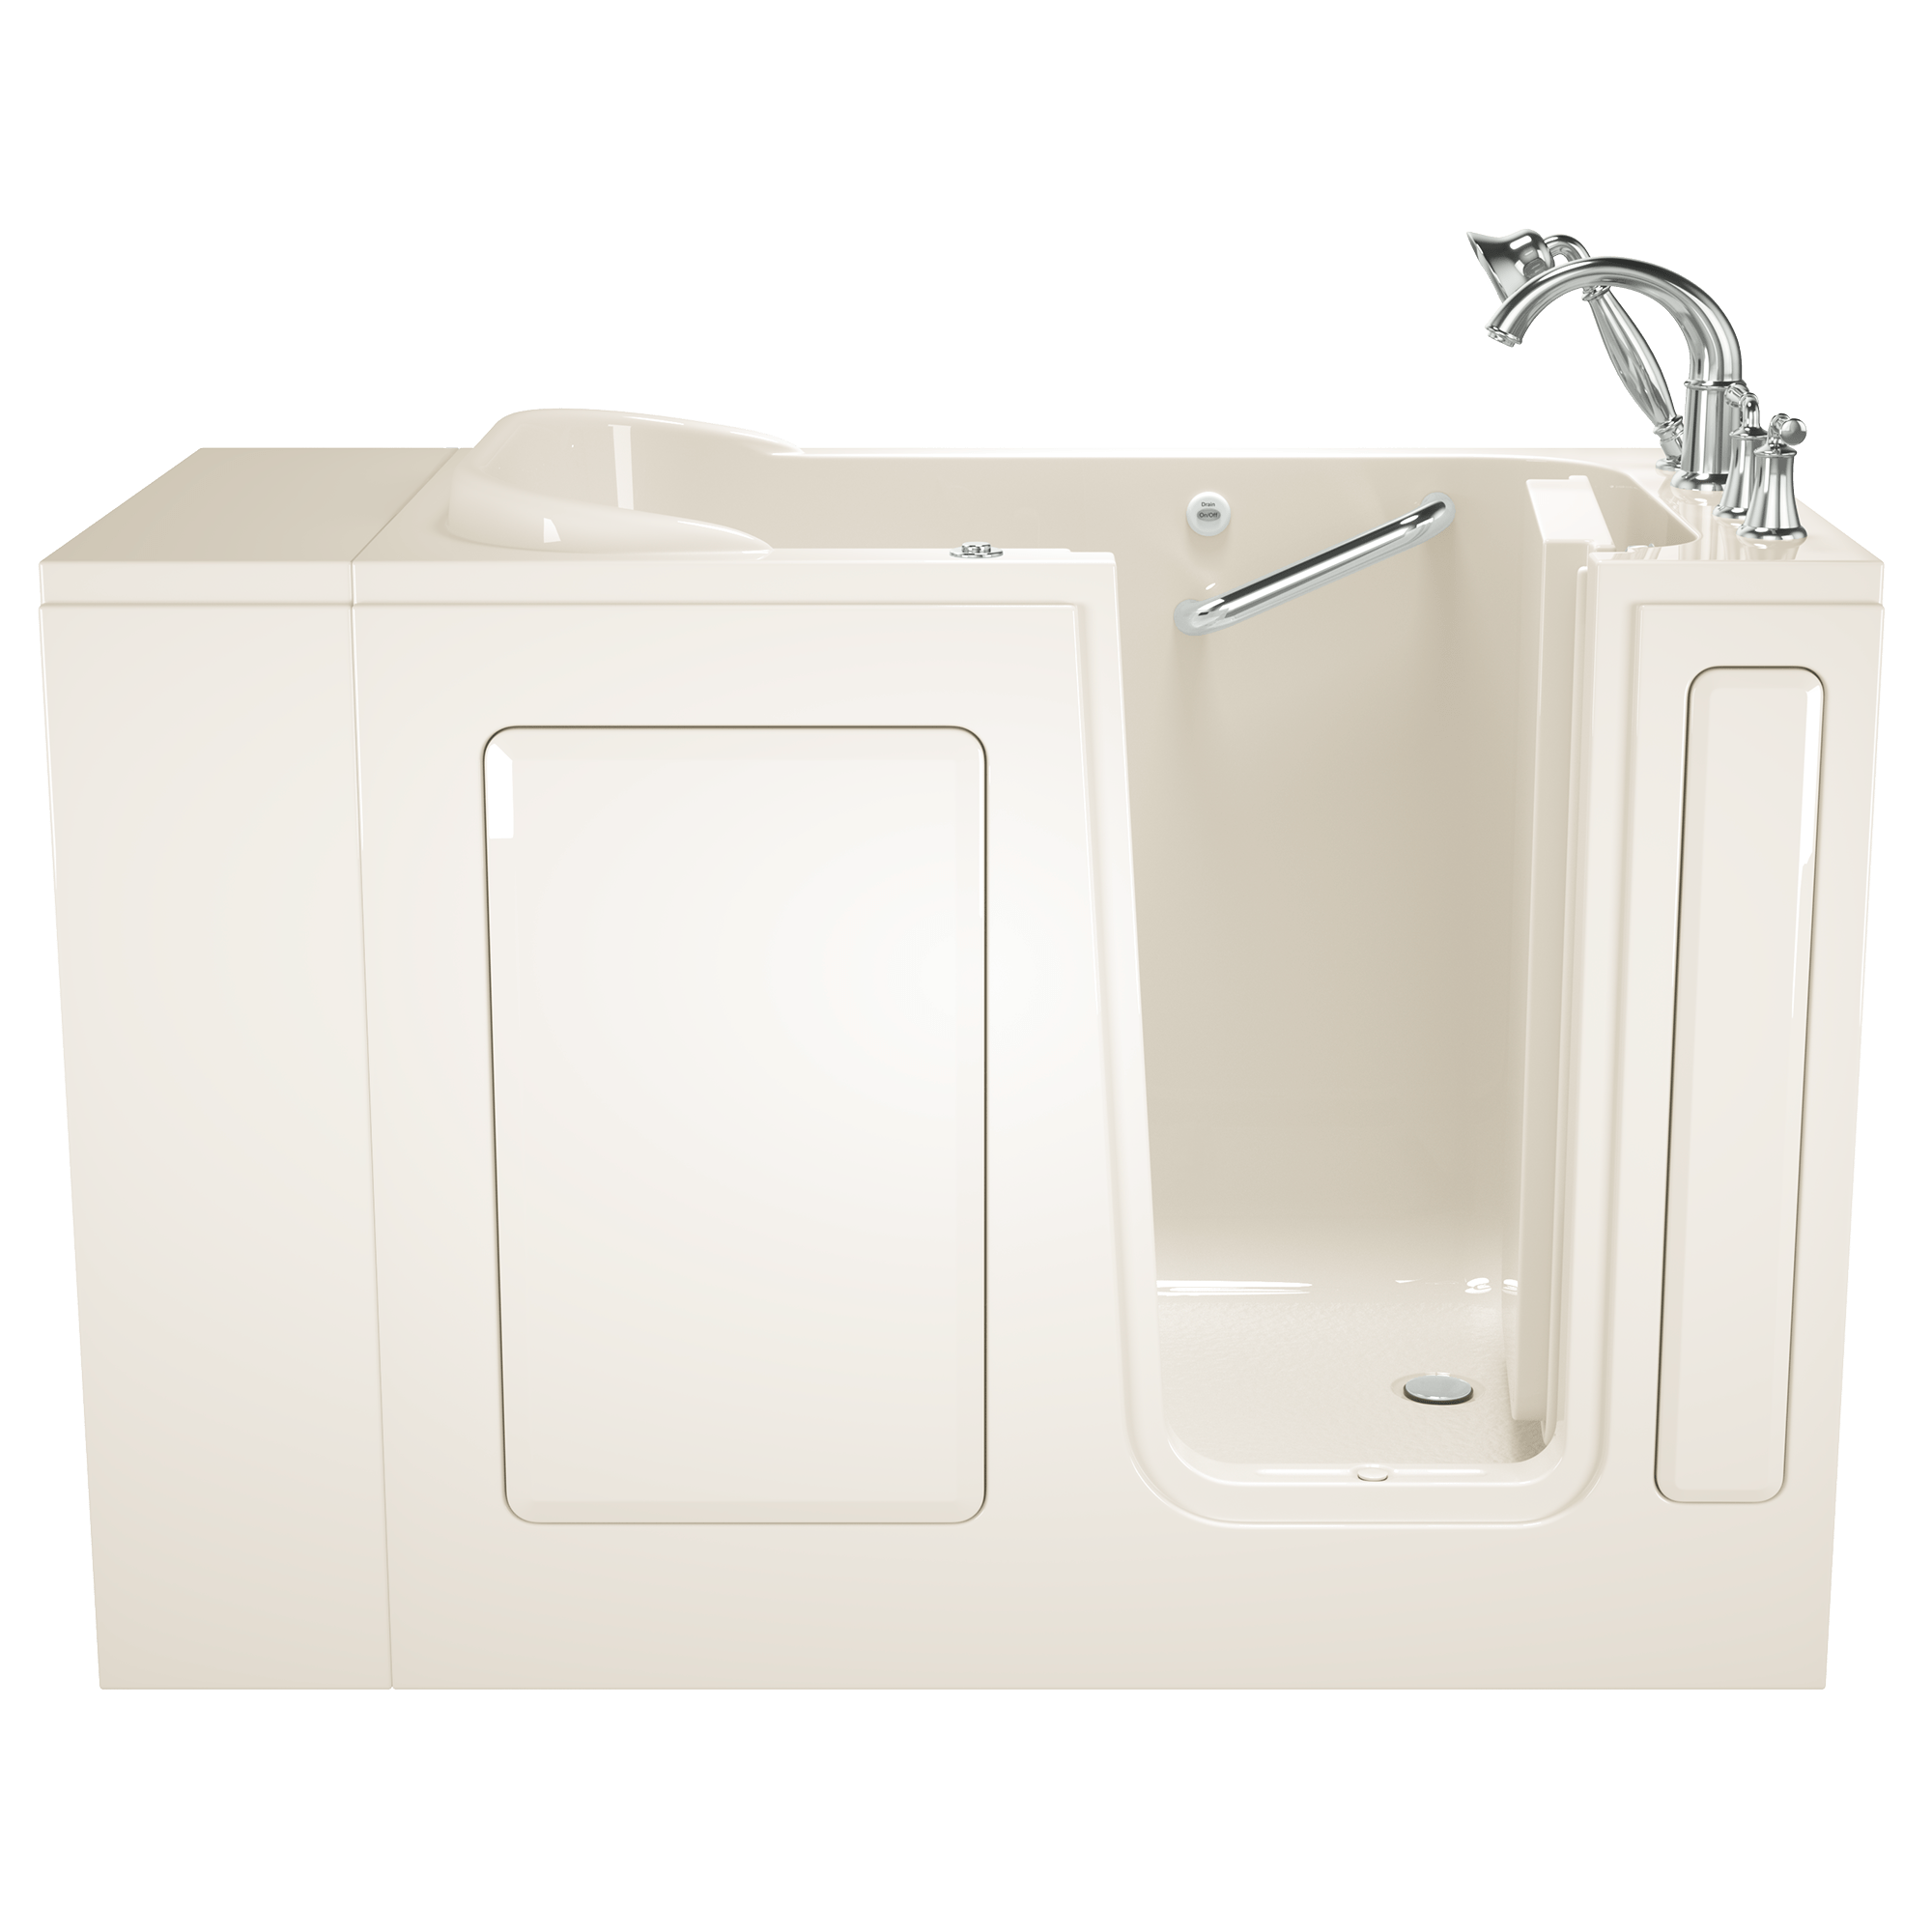 Gelcoat Value Series 28x48 Inch Walk In Bathtub with Air Spa System  Right Hand Door and Drain WIB LINEN